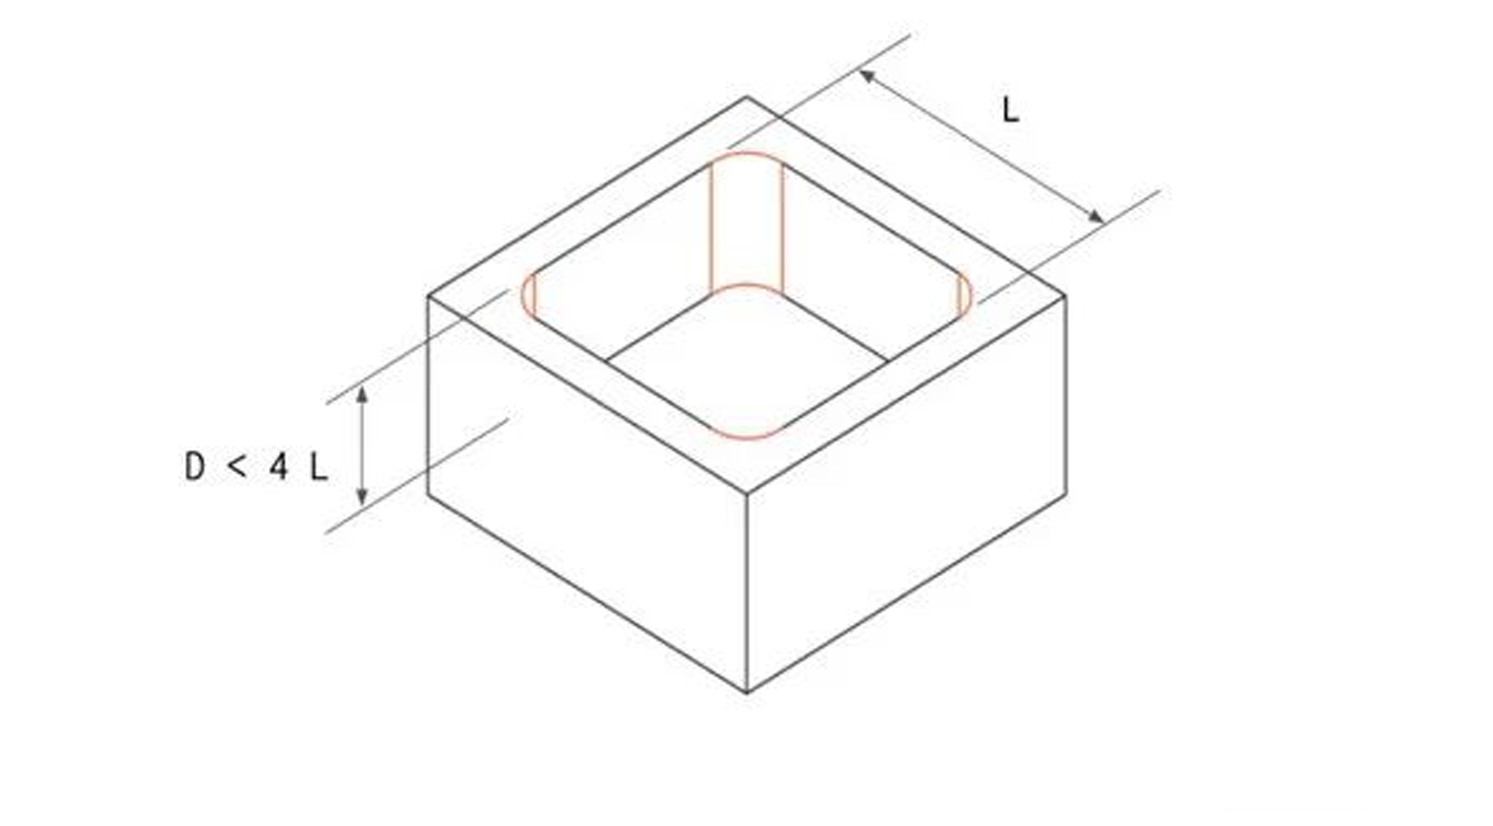 limit the hole length to 4 times the diameter